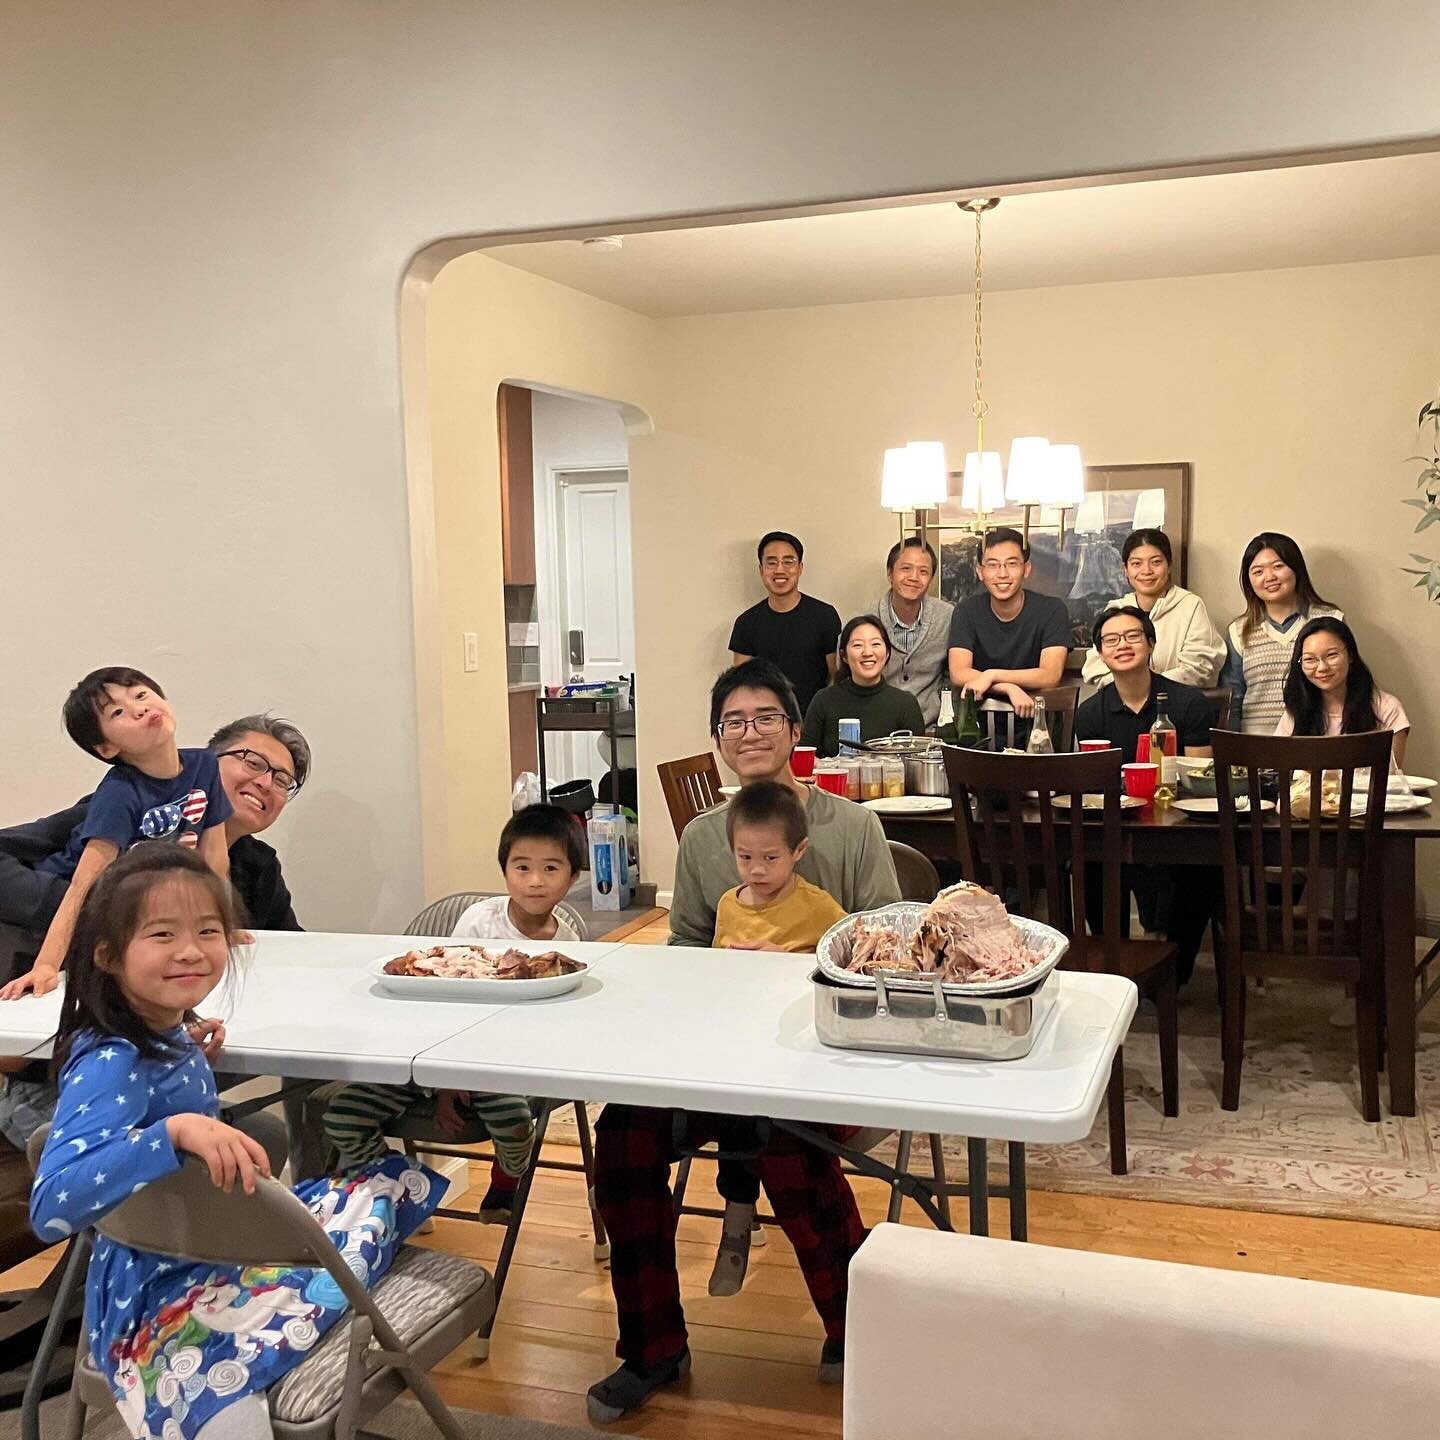 Ending the Thanksgiving weekend highlights off with Richard and Olivia Lu, from our young adult fellowship, LSF:

&ldquo;Berkeley small group at Nate's place for a happy Thanksgiving feast! Complete with roast beast 🙂

(but thankfully no grinches he